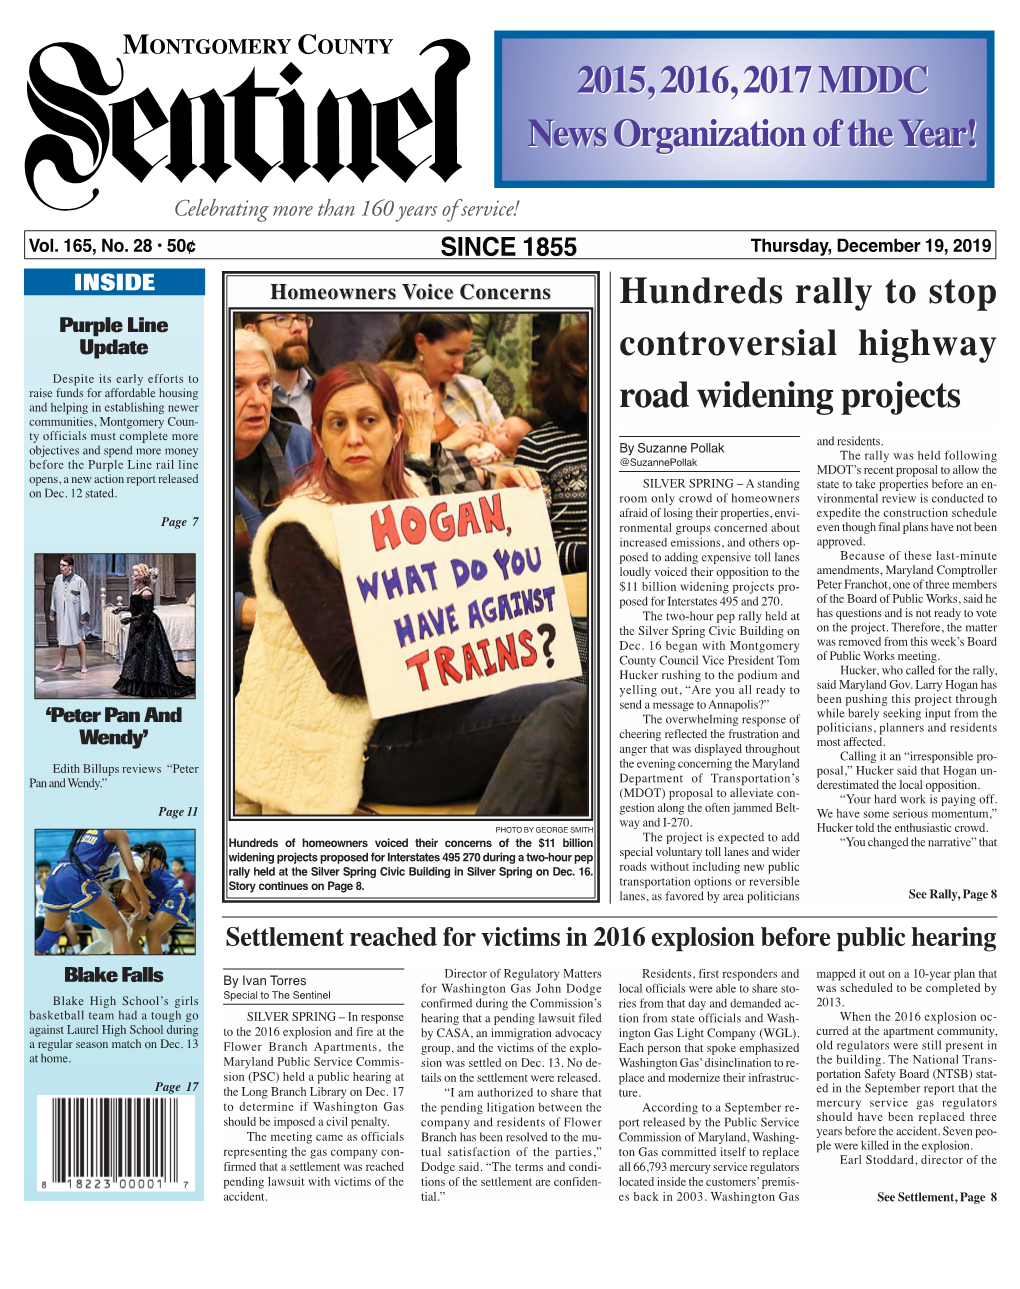 THE MONTGOMERY COUNTY SENTINEL DECEMBER 19, 2019 EFLECTIONS R the Montgomery County Sentinel, Published Weekly by Berlyn Inc